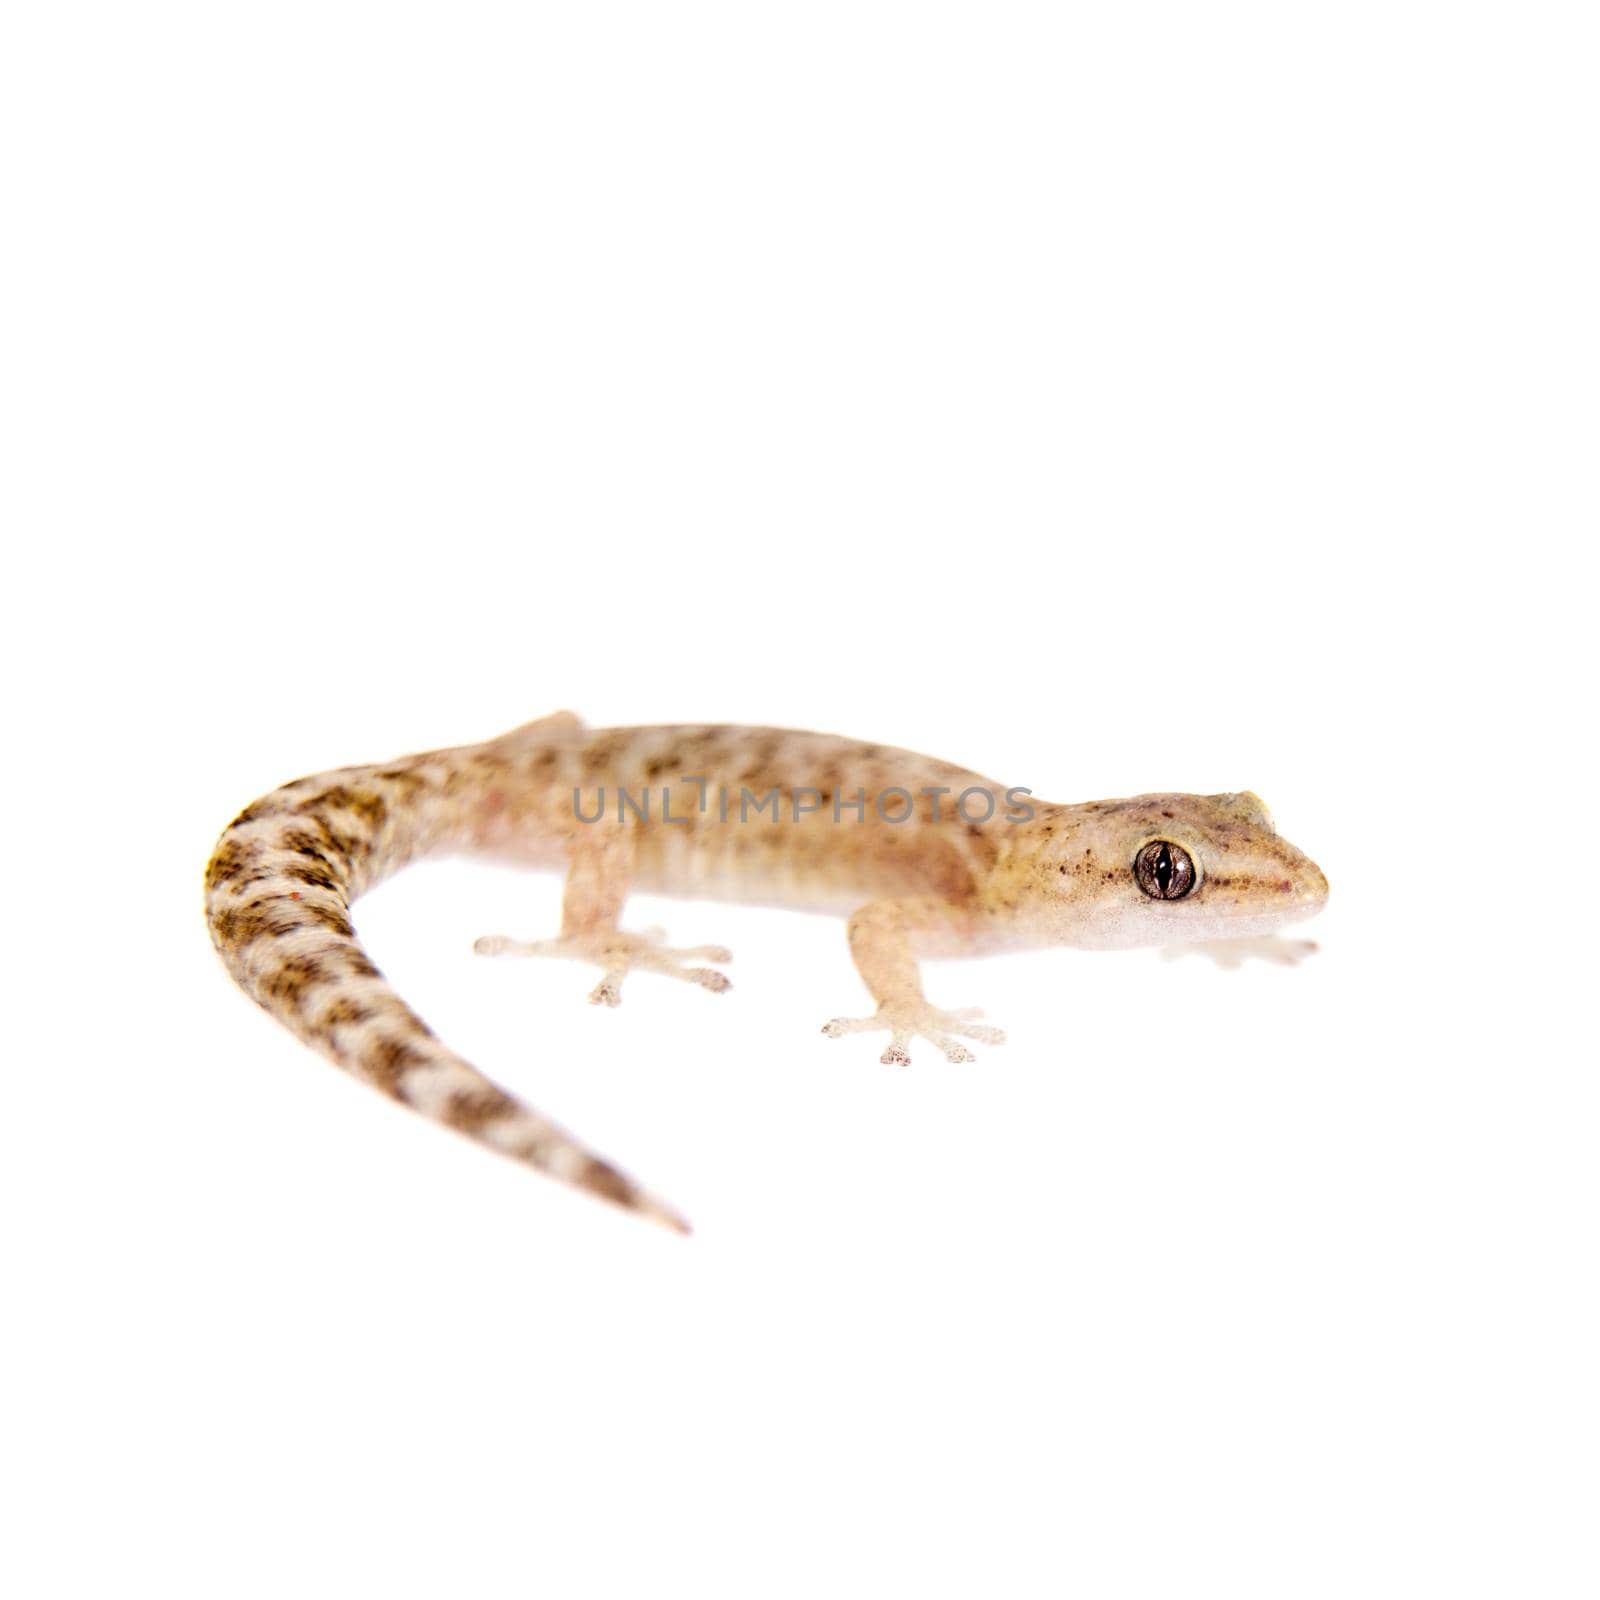 The marbled leaf-toed gecko, Afrogecko porphyreus, isolated on white